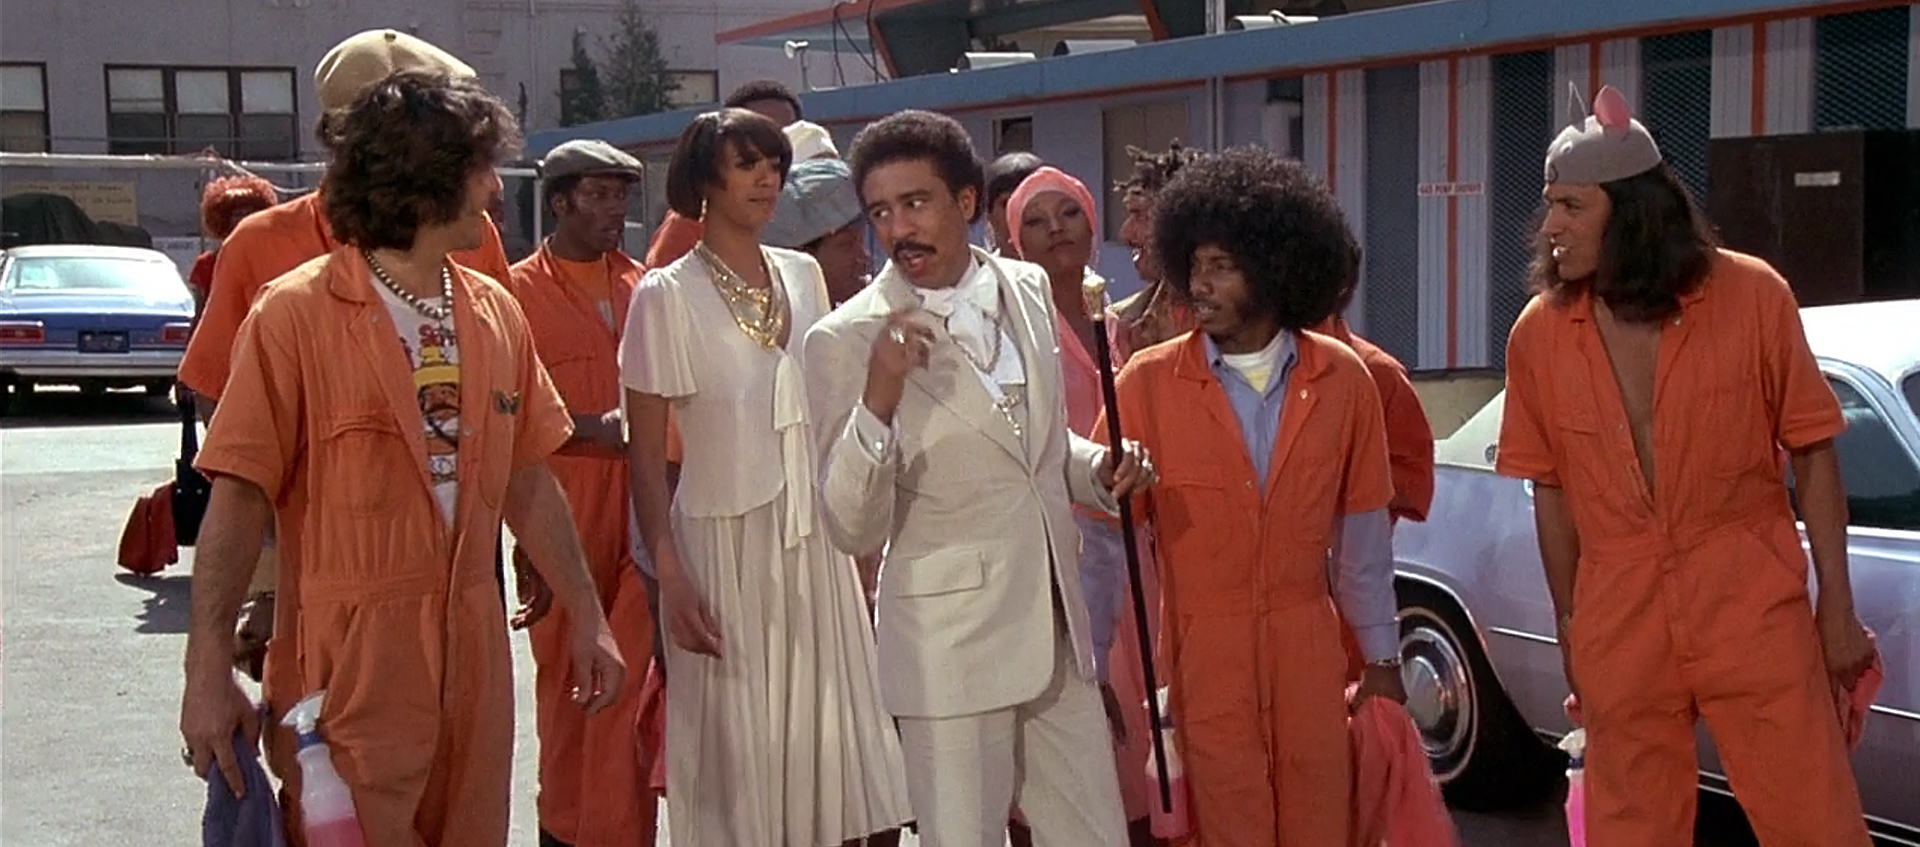 A group of nine people standing in front of a car. Eight of the people wear orange worksuits, while the two people in the center wear shiny white suits